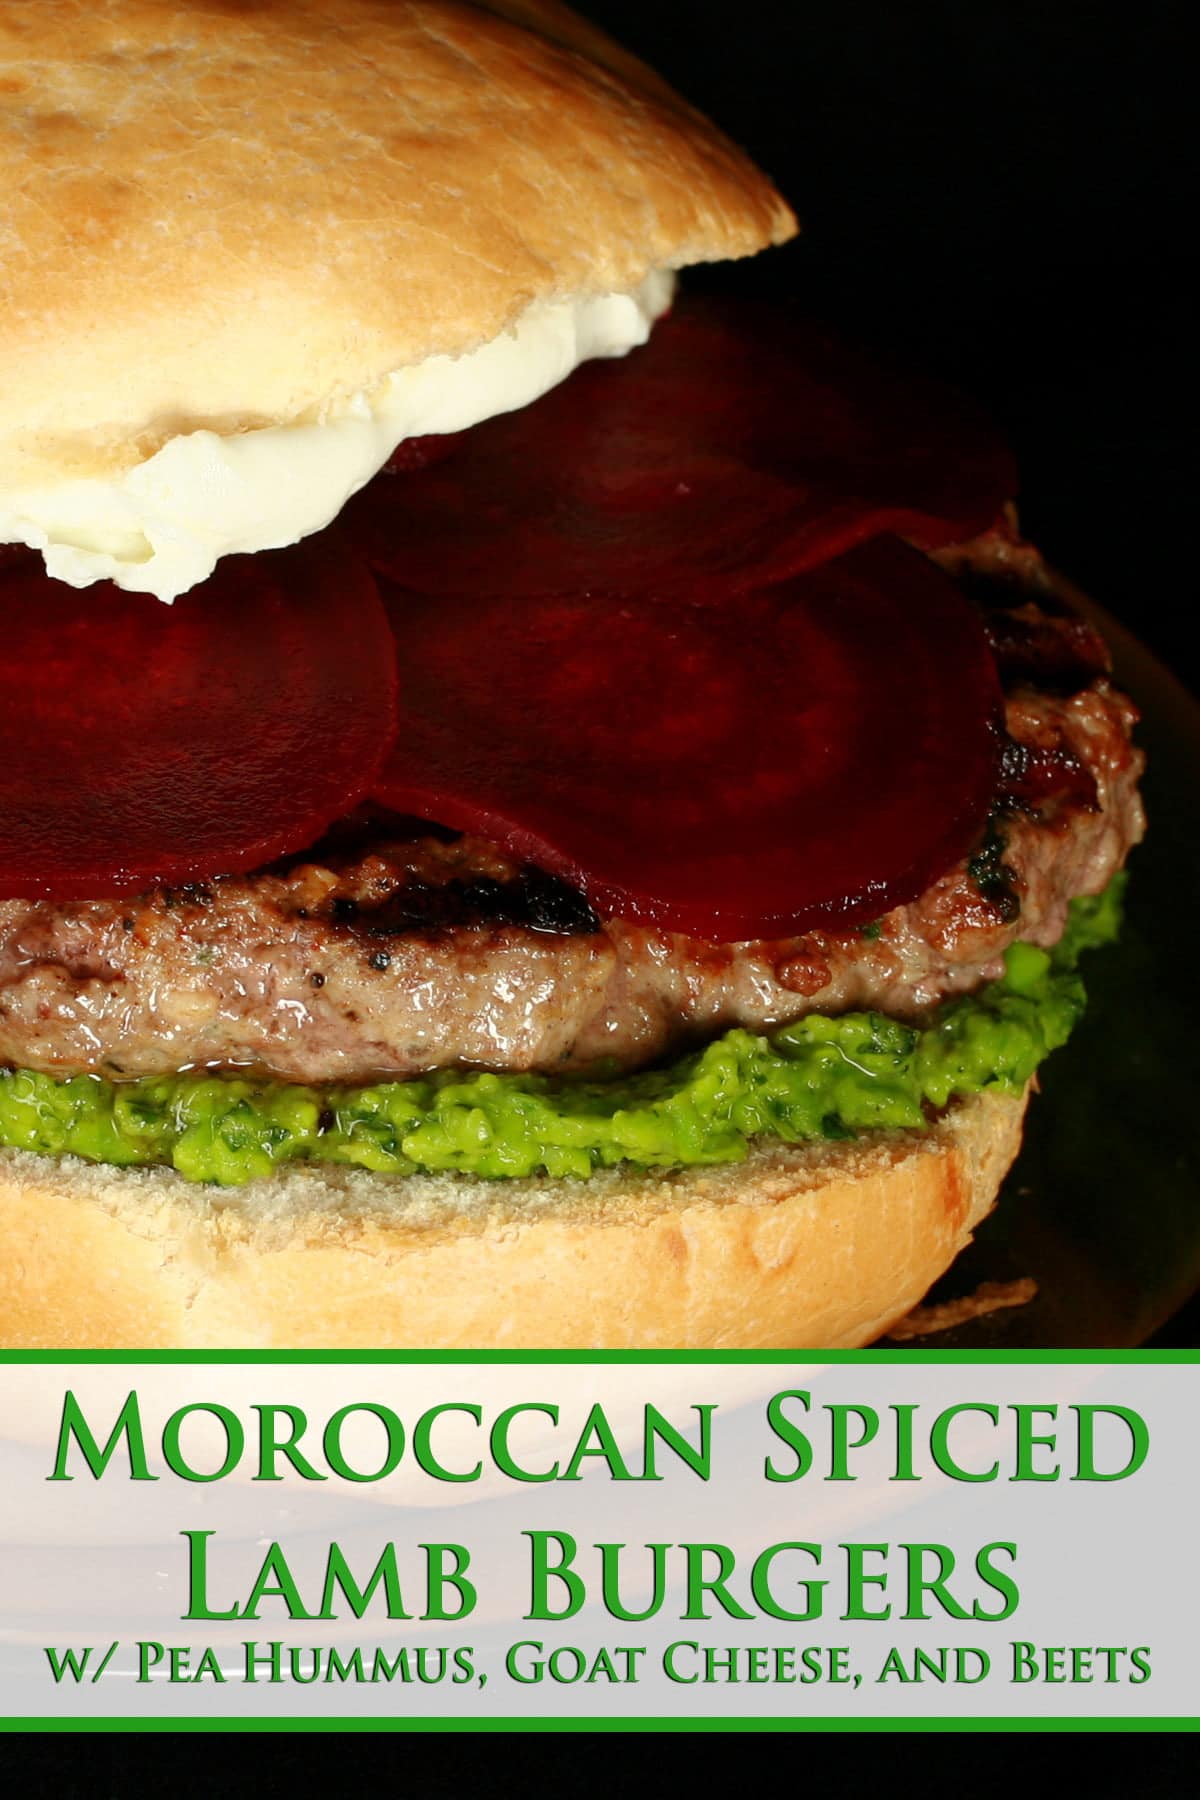 Close up view of a burger with a green spread, a goat cheese spread, and beet slices on it.